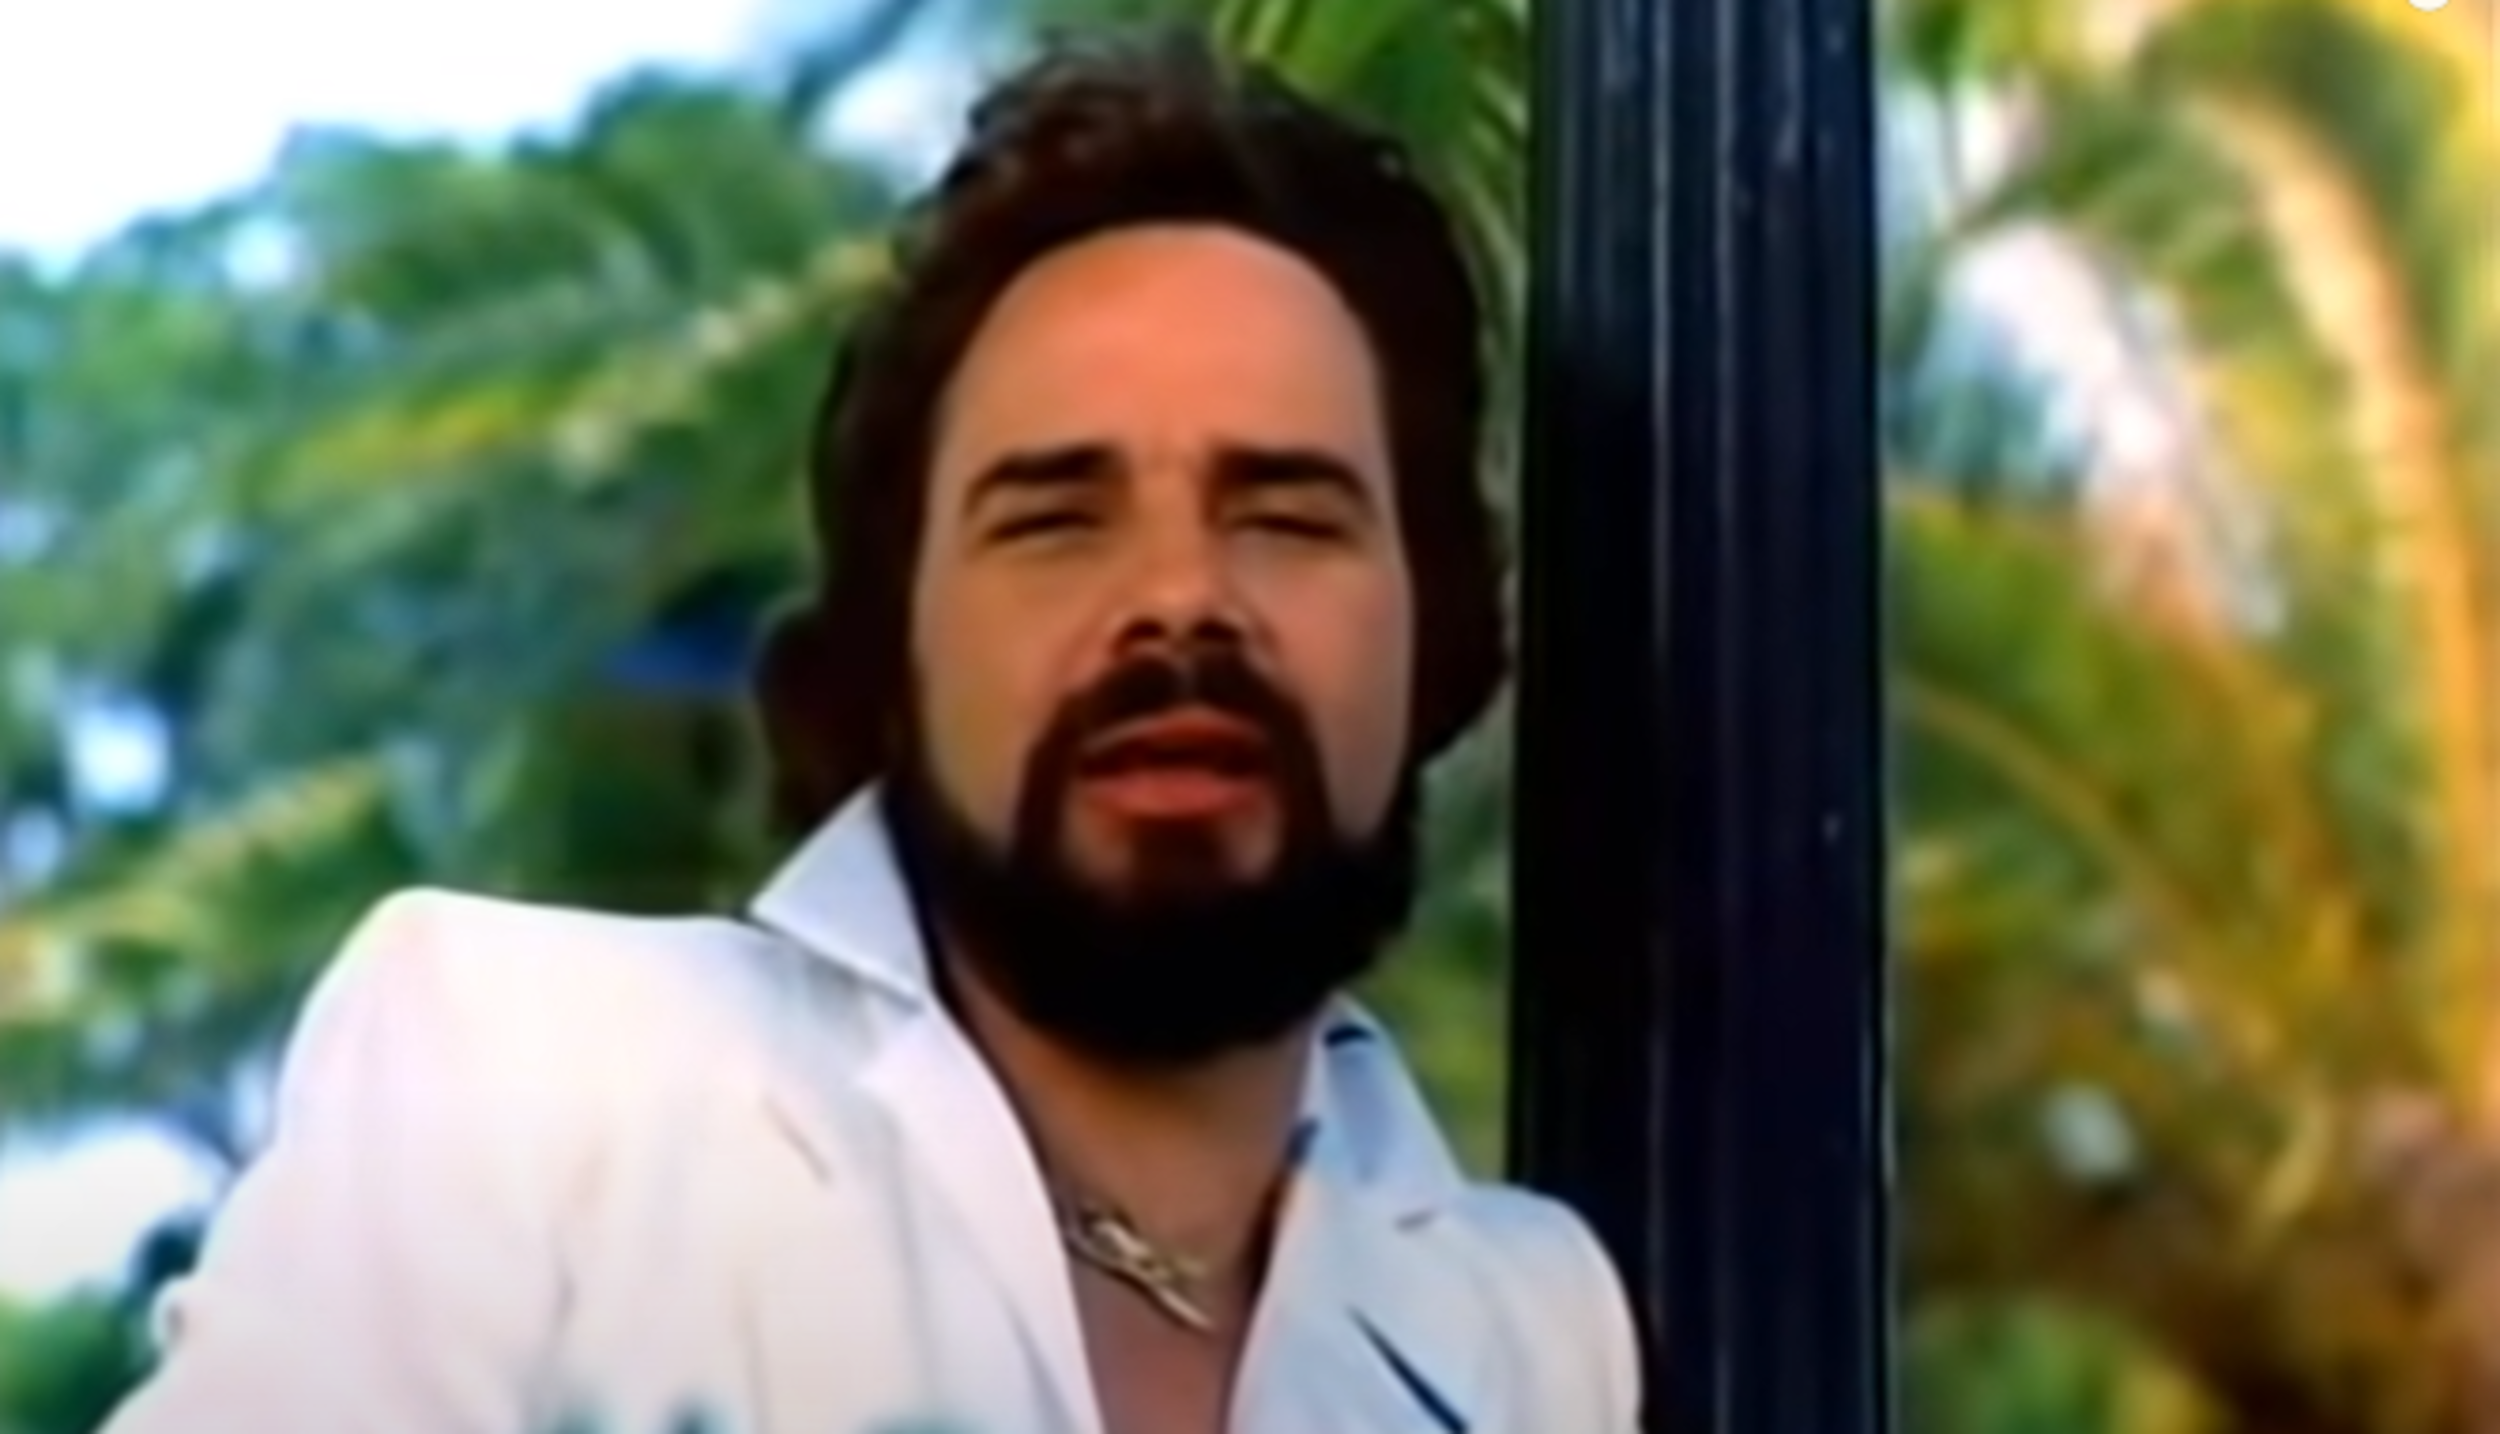 <p>Yacht rock and one-hit wonders seem to go hand-in-hand. Higgins scored one in the early 1980s with this number that reached No. 8 on the <em>Billboard</em> Hot 100. The Florida native was inspired to write this <a href="https://www.youtube.com/watch?v=Ru2tsT32pHA">song about trying to avoid a romantic breakup</a> by the 1948 movie of the same name, starring Humphrey Bogart and Lauren Bacall, who are referenced in the tune. Though Higgins never enjoyed the same individual success as a musician, the song has had a solid shelf life and remains a definitive moment in the yacht rock genre.</p><p>You may also like: <a href='https://www.yardbarker.com/entertainment/articles/the_25_top_selling_rock_albums_of_all_time_102723/s1__39121793'>The 25 top-selling rock albums of all time</a></p>